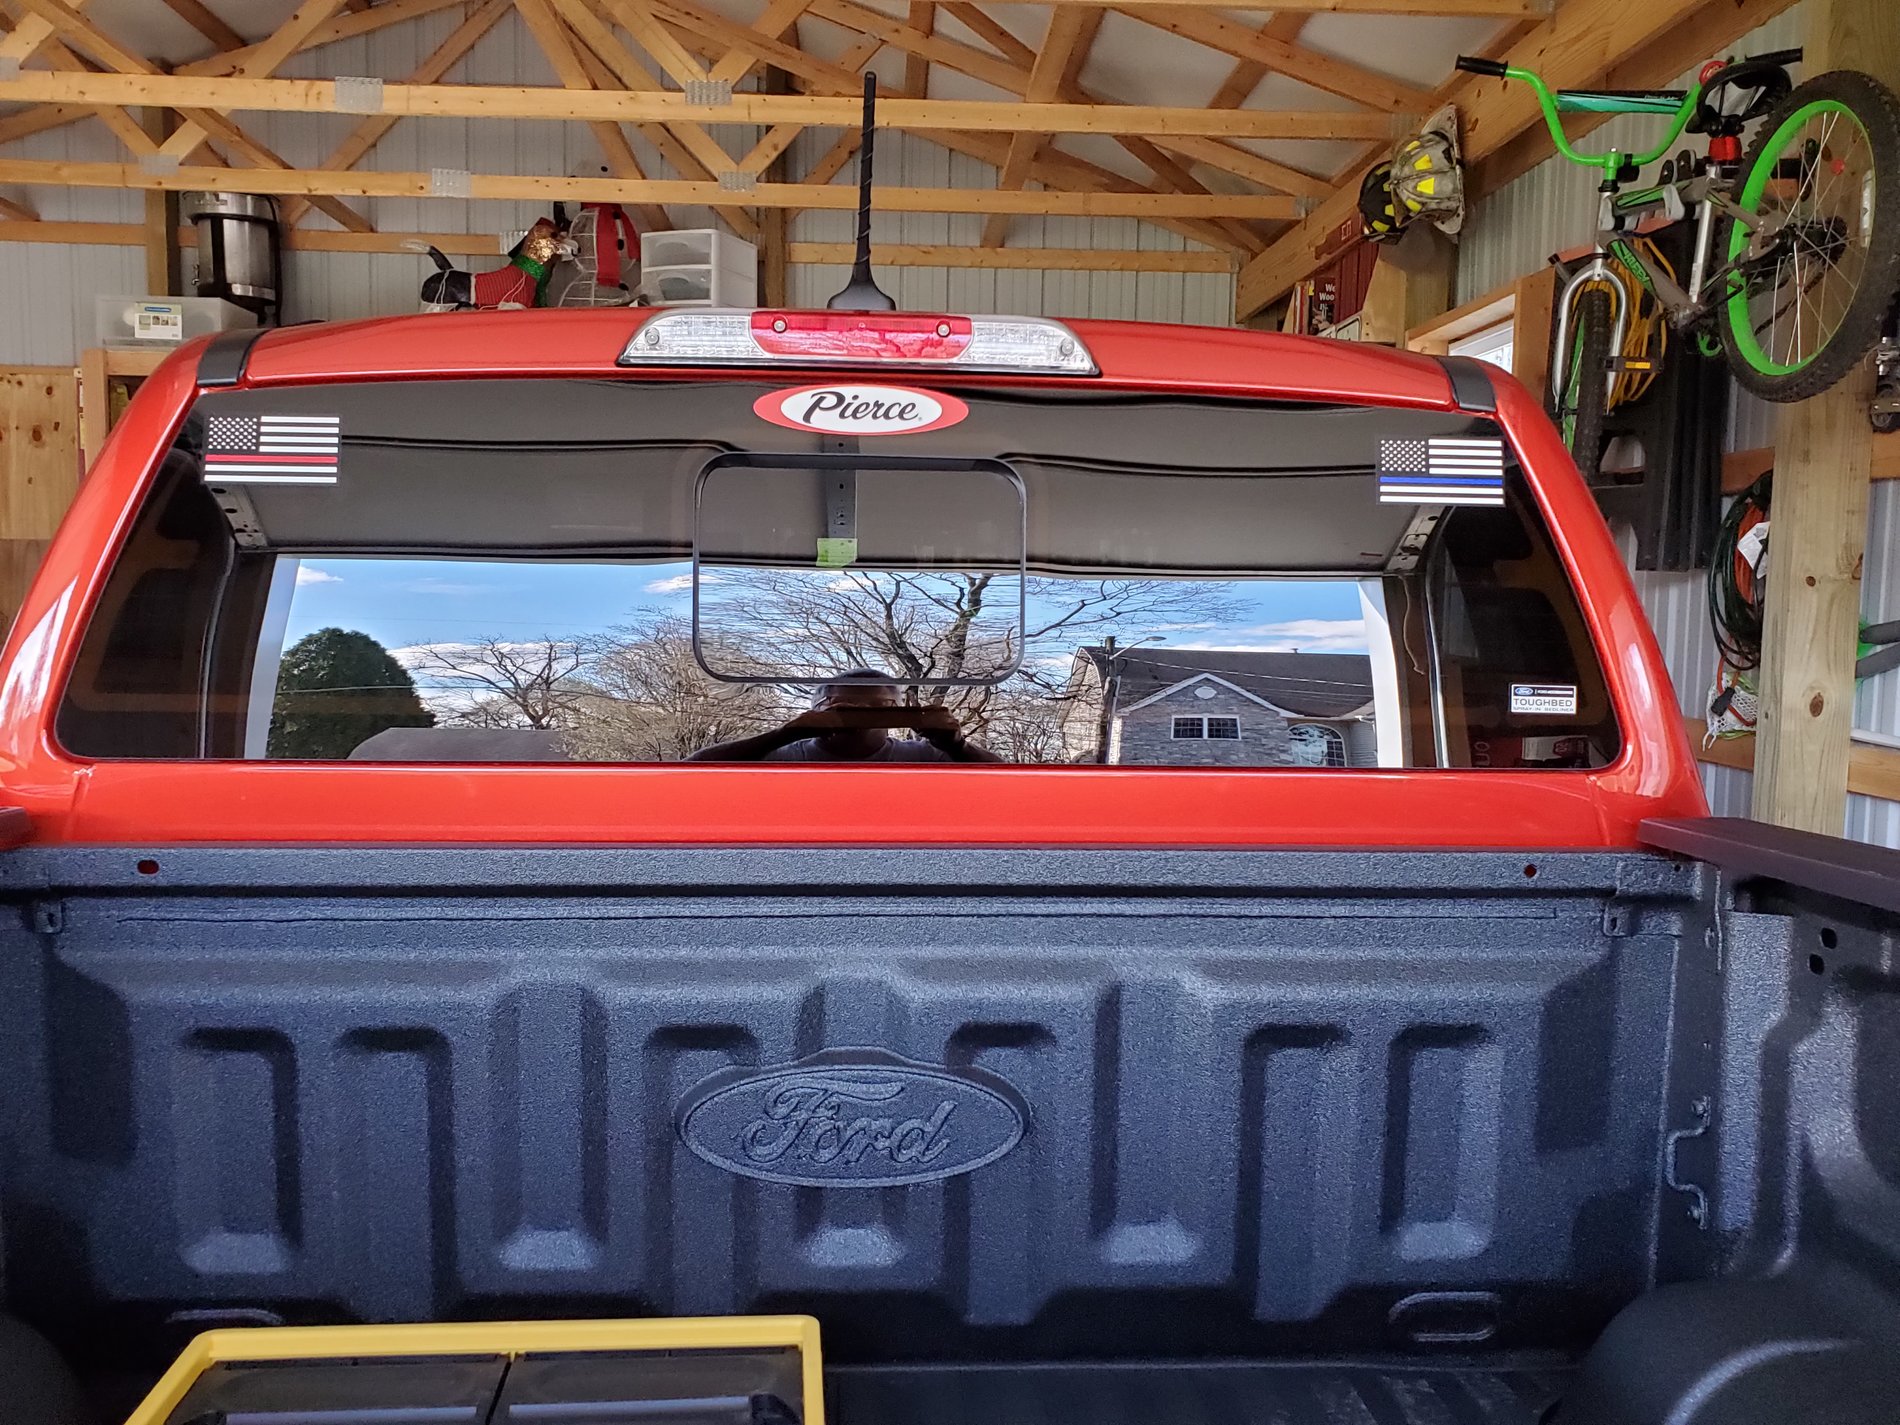 Ford Ranger Lets see those Cab window decals!! 20190410_165946